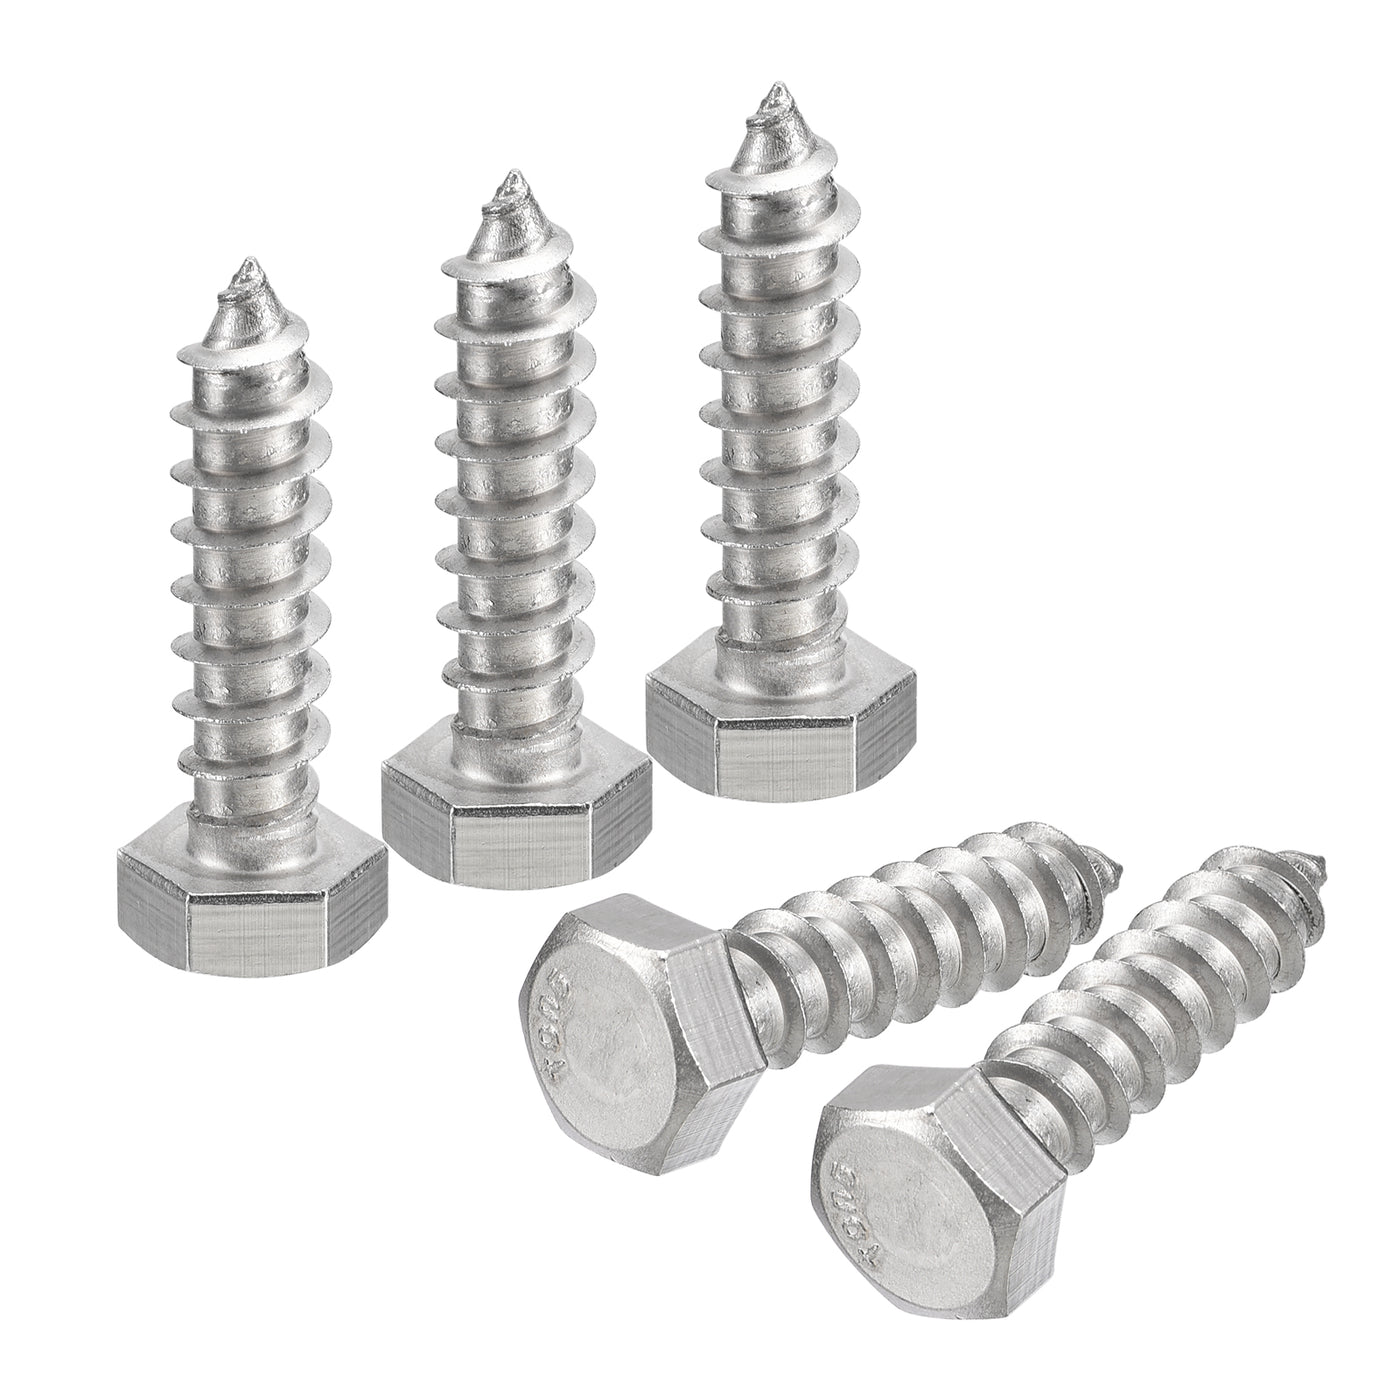 uxcell Uxcell Hex Head Lag Screws Bolts, 20pcs 3/8" x 1-1/2" 304 Stainless Steel Wood Screws